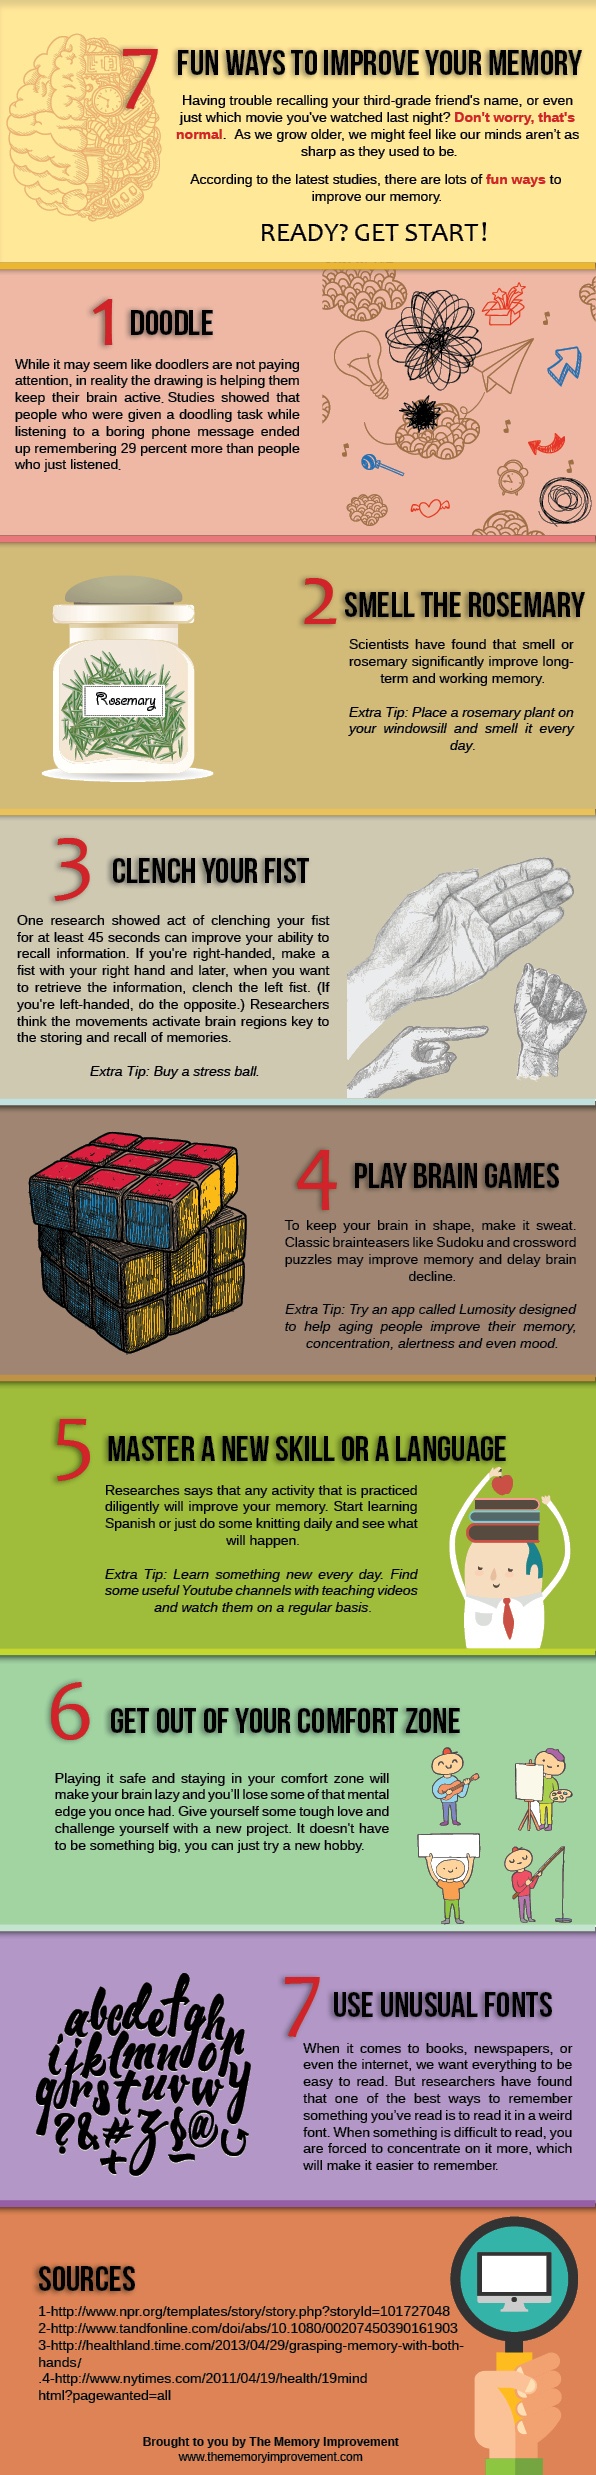 Fun Ways To Improve Your Memory Infographic